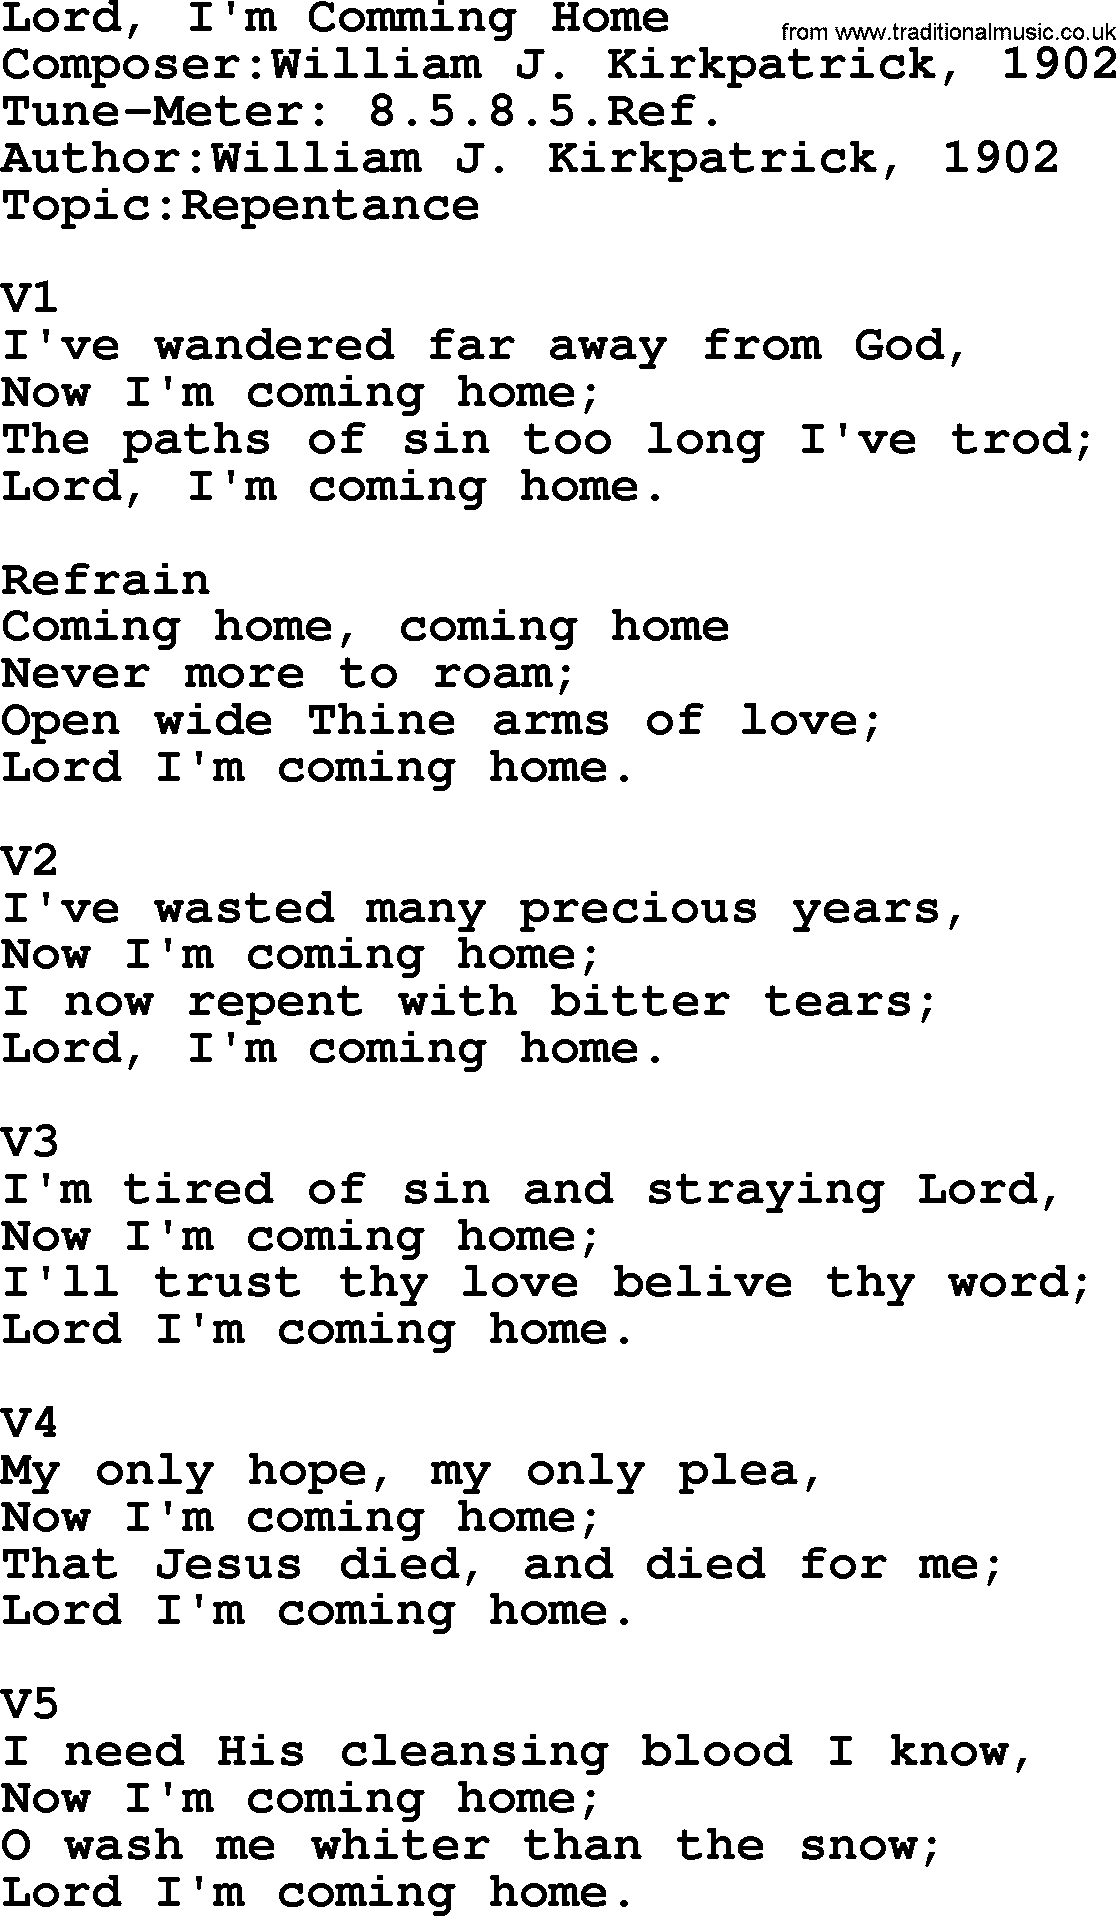 Adventist Hynms collection, Hymn: Lord, I'm Comming Home, lyrics with PDF